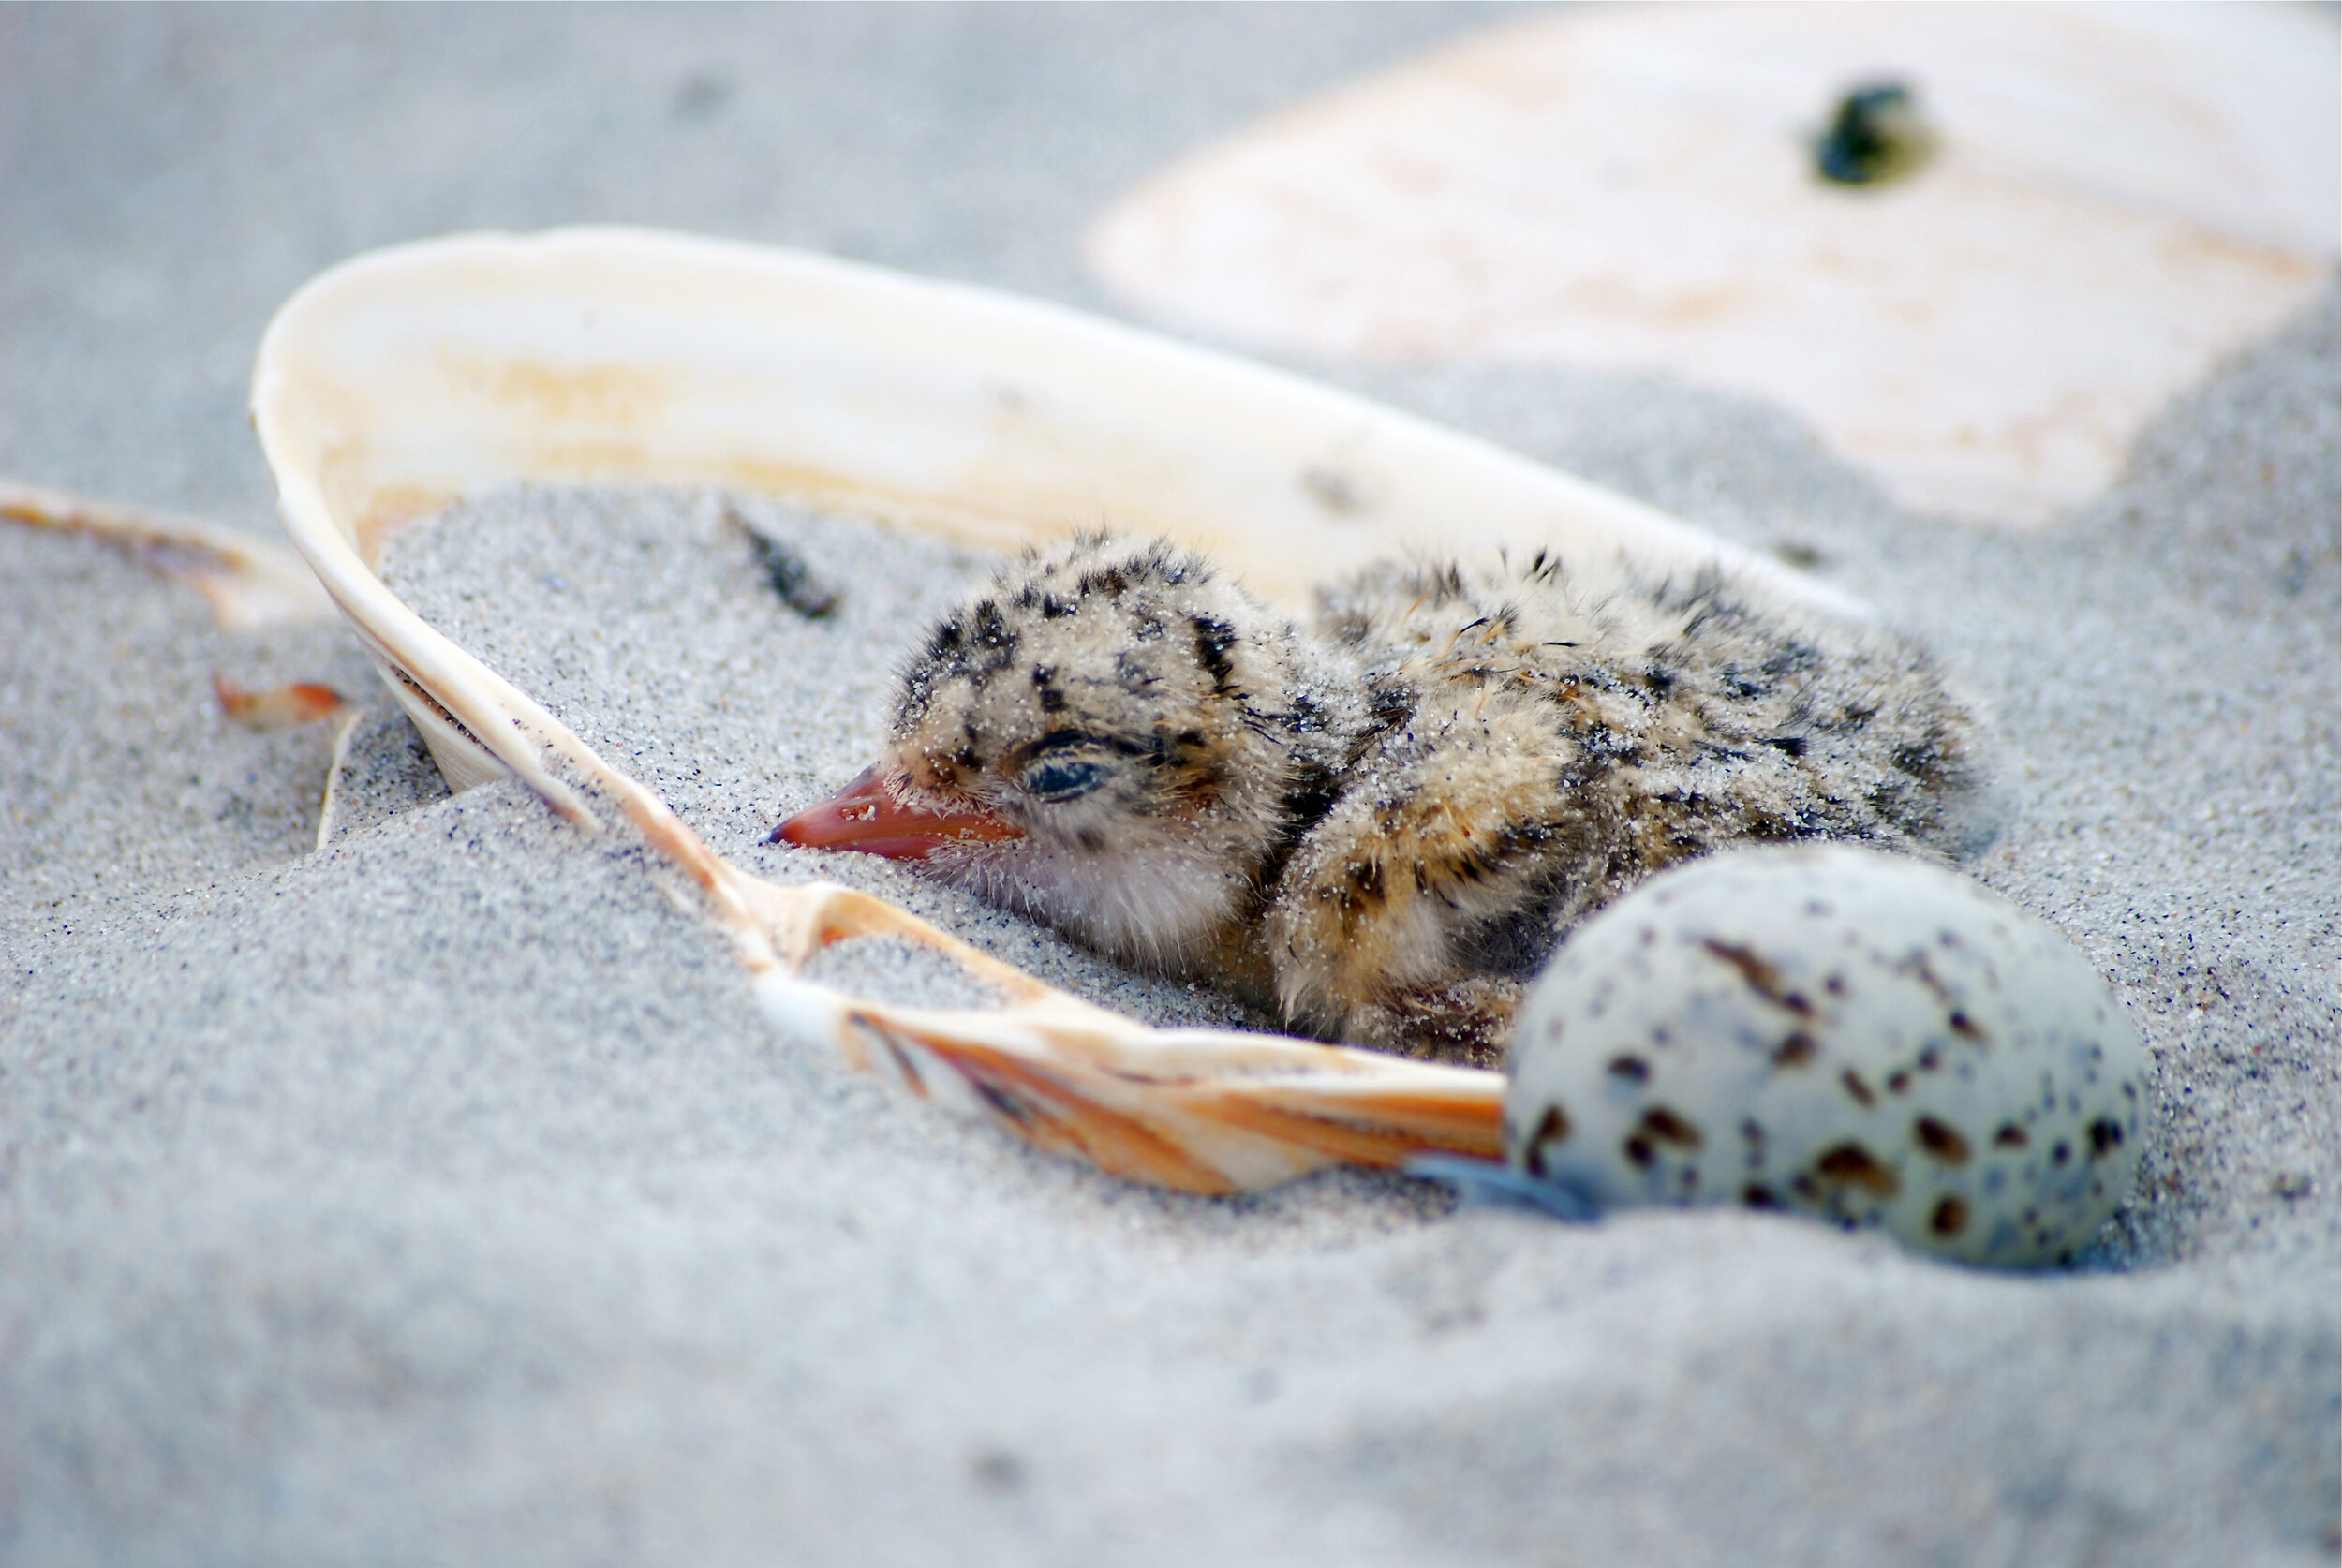 Least tern egg and chick inside a clam shell for scale.